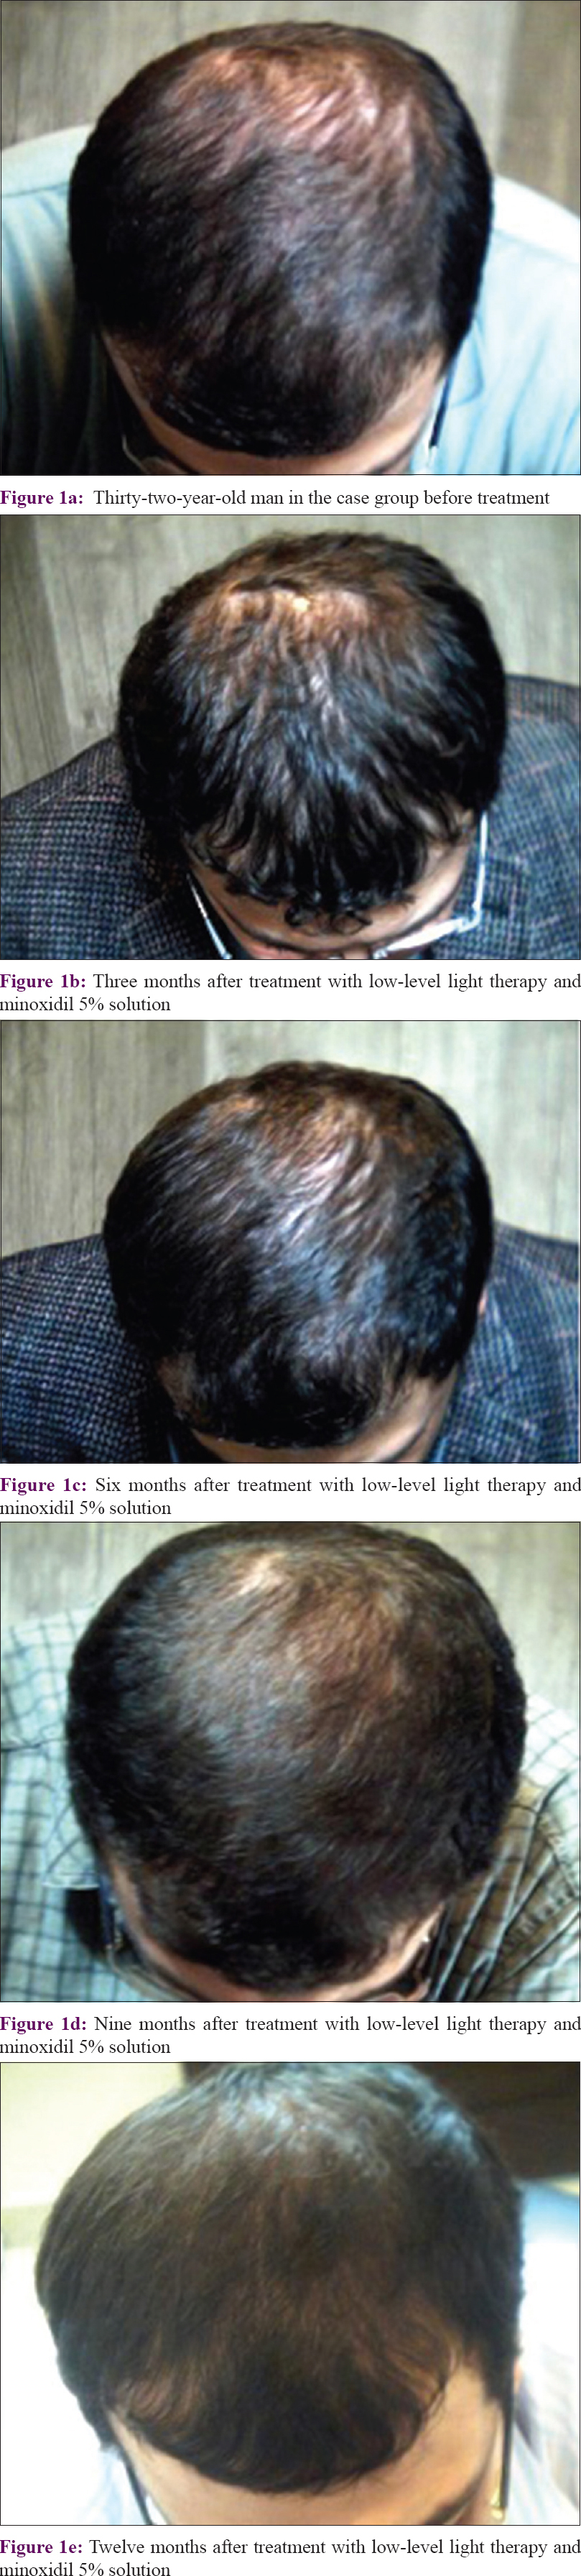 The effectiveness of adding low-level therapy to minoxidil 5% solution in the treatment of with androgenetic - Indian Journal of Dermatology, Venereology Leprology